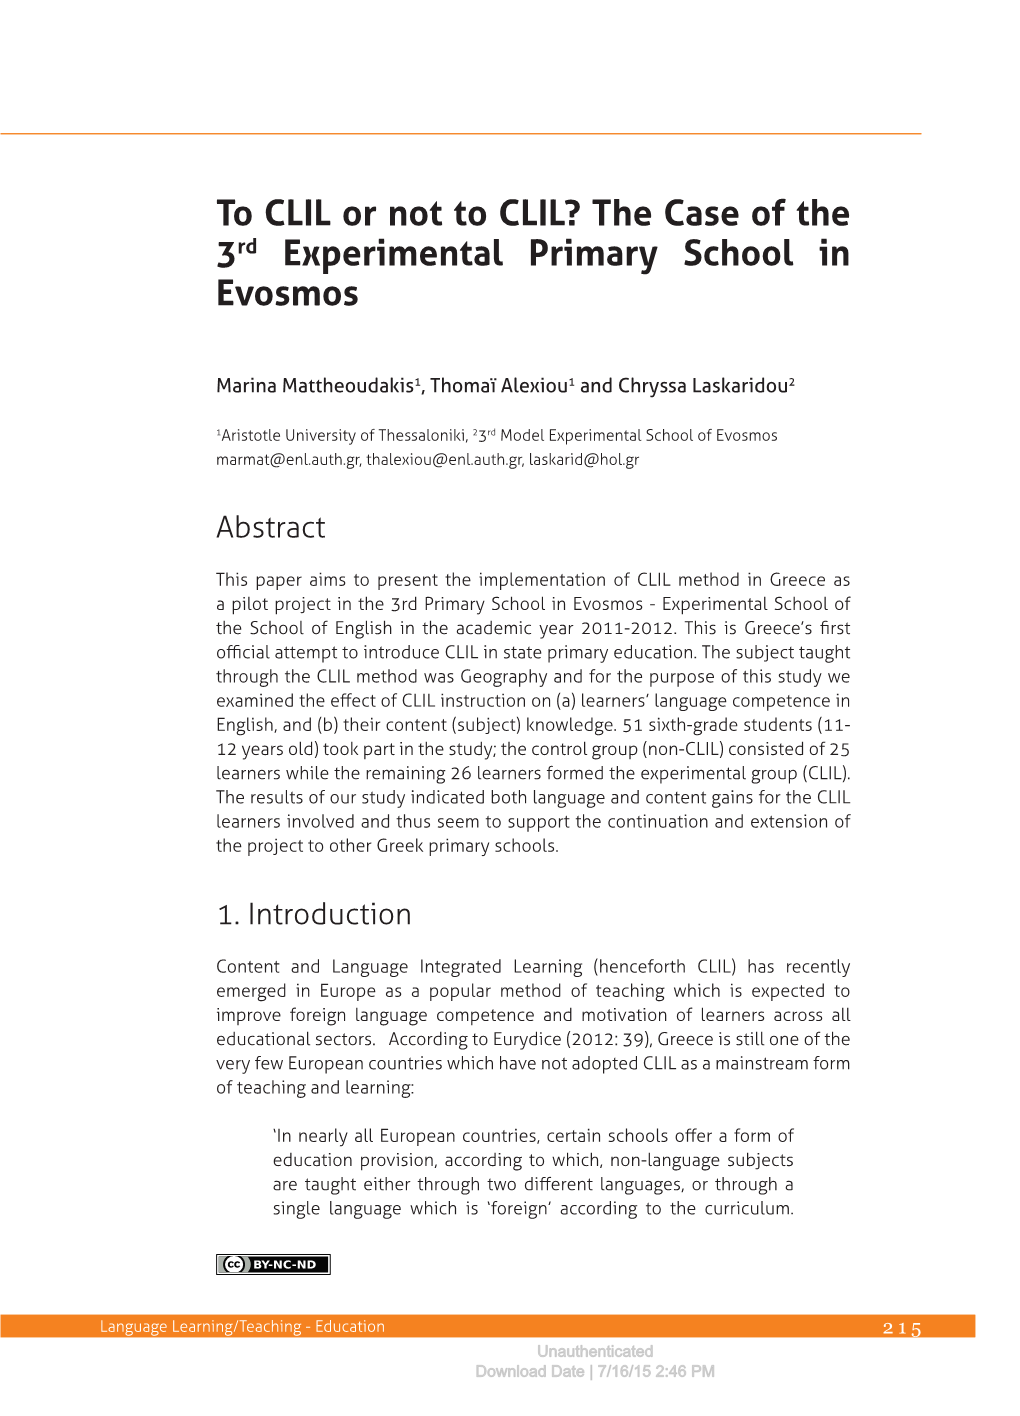 To CLIL Or Not to CLIL? the Case of the 3Rd Experimental Primary School in Evosmos